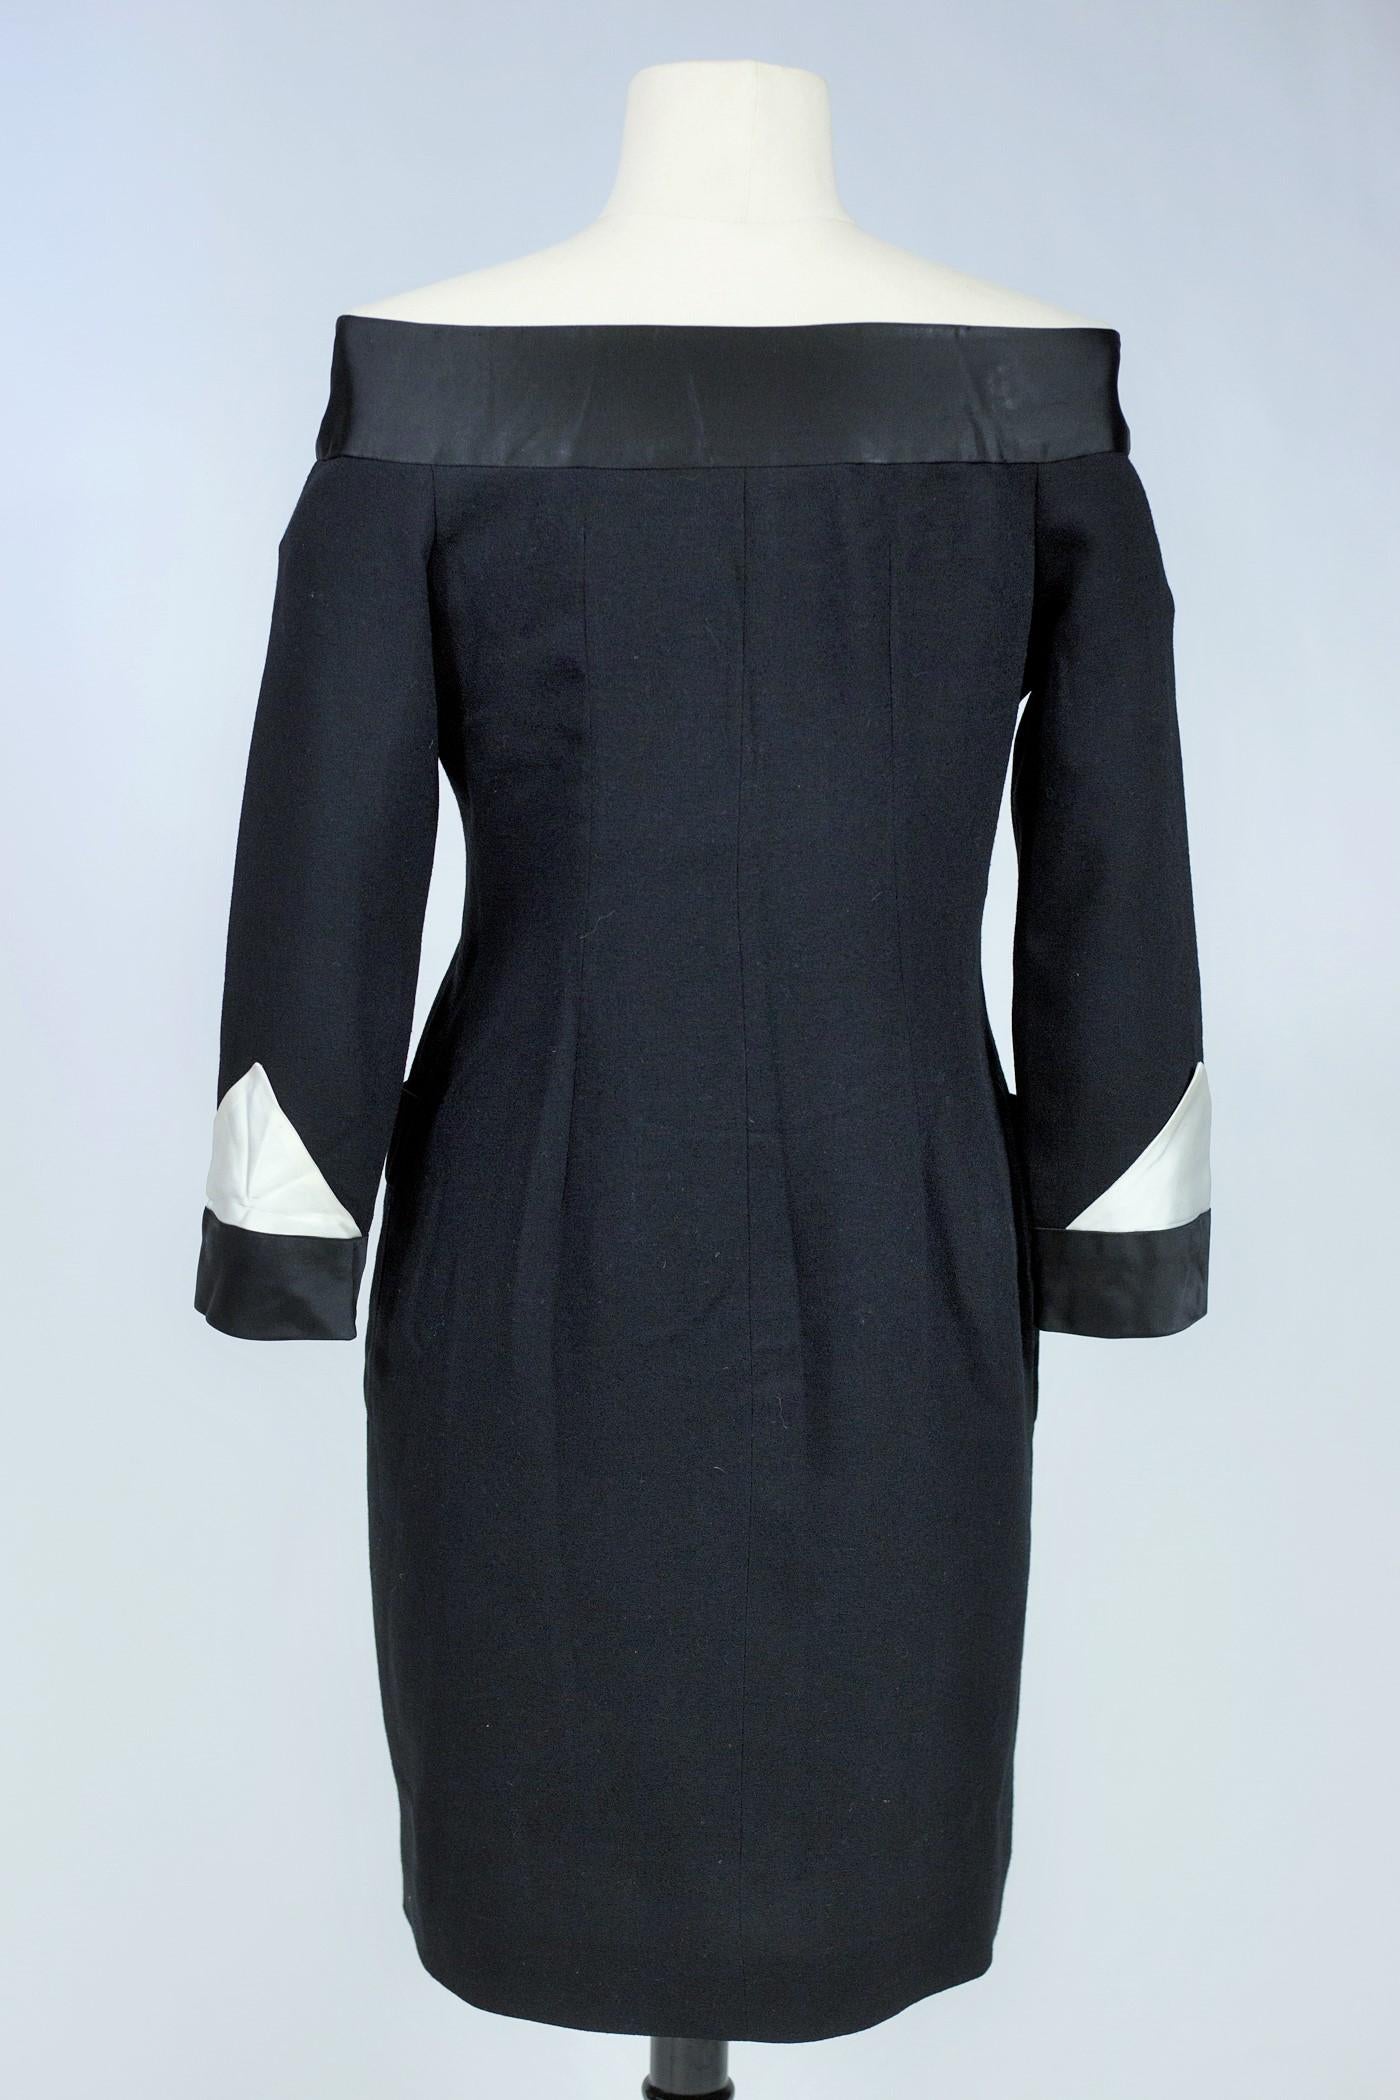 Women's Little black dress inspired by Chanel in crepe and satin Circa 1965 For Sale